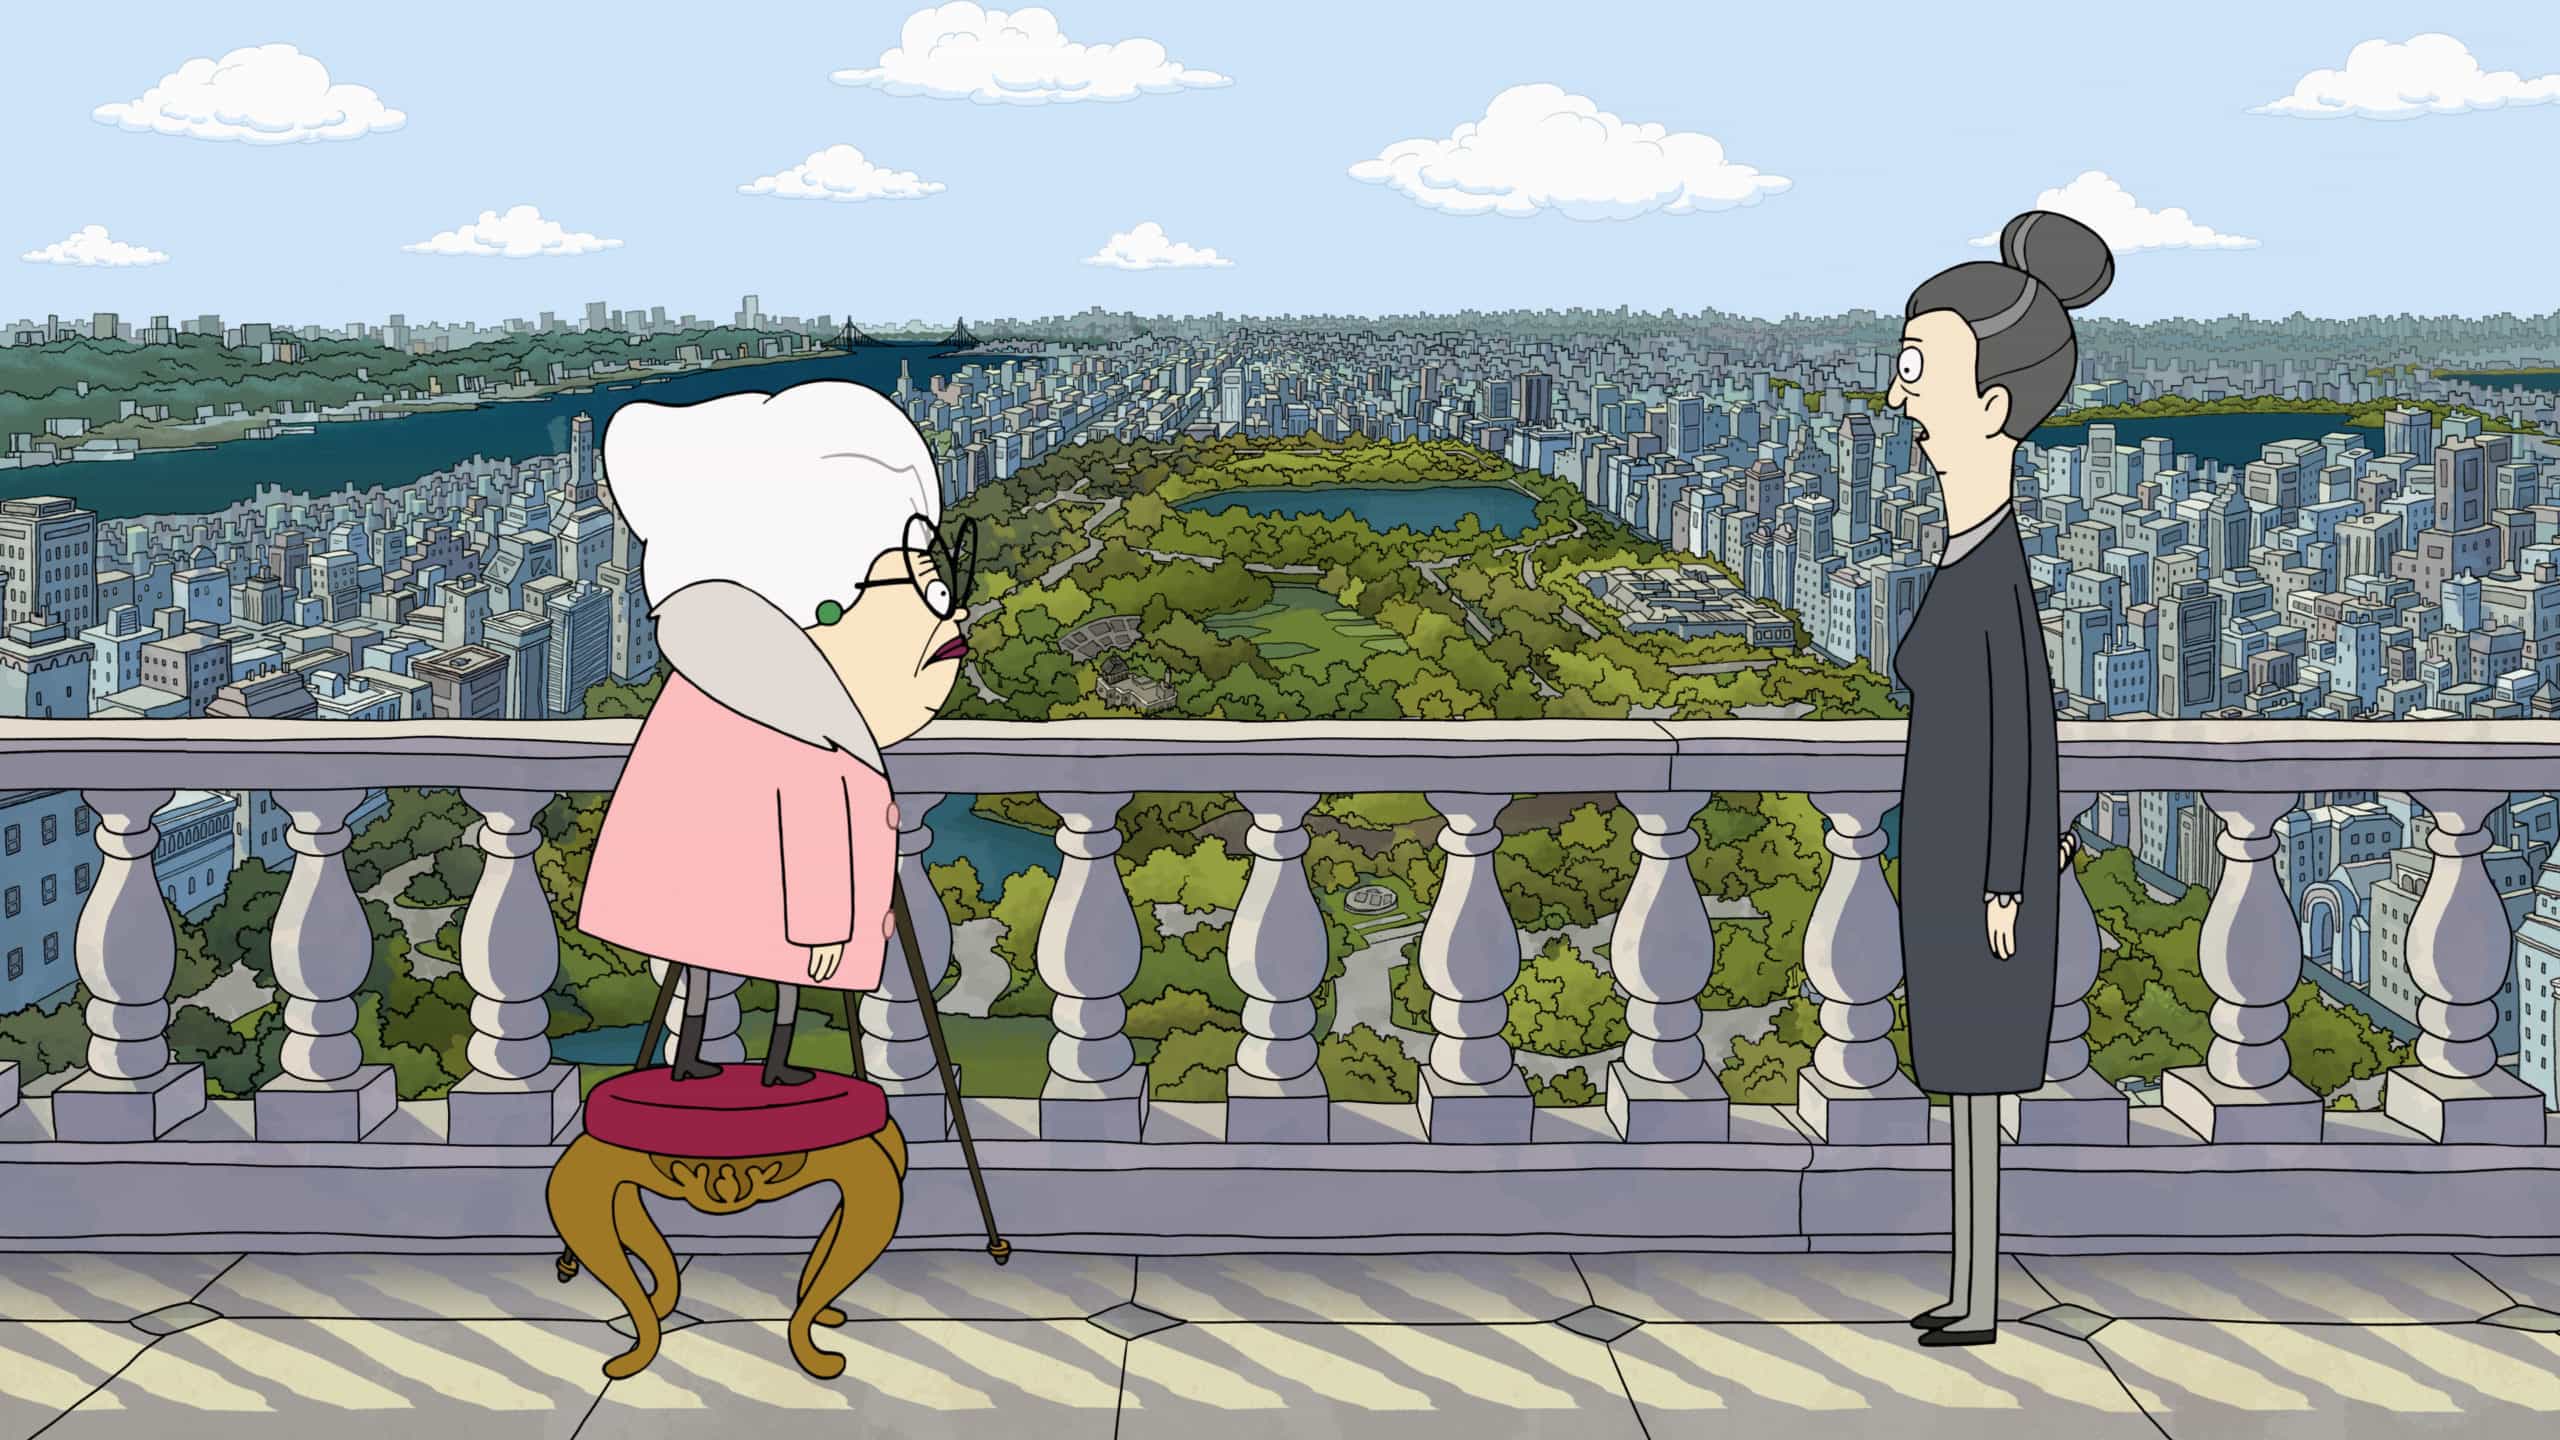 The characters voiced by Daveed Diggs and Stanley Tucci act out their own little remake of The Devil Wears Prada in Central Park. 